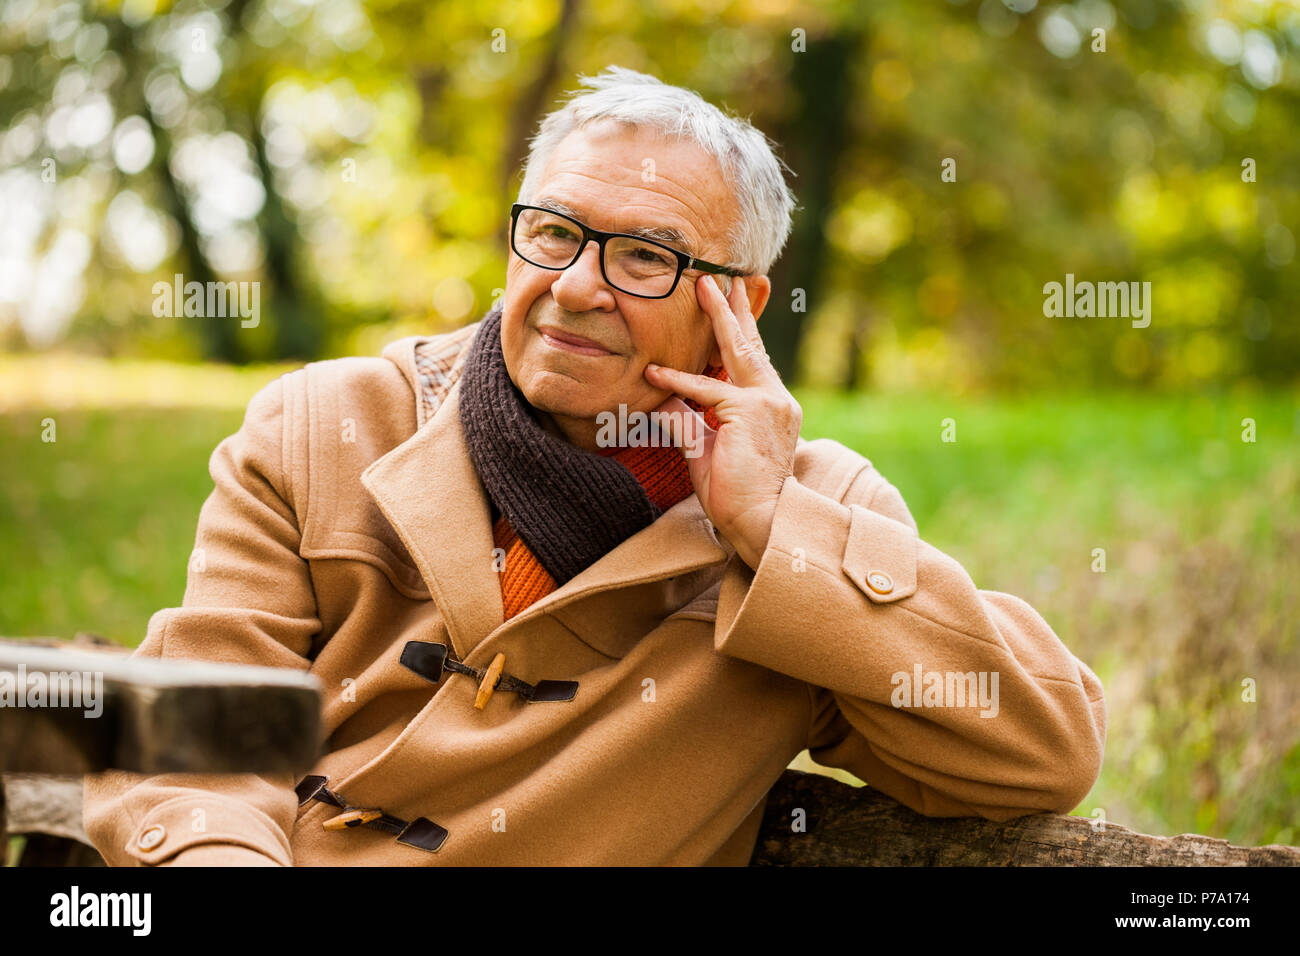 Worried and pensive senior man sitting in park. Stock Photo